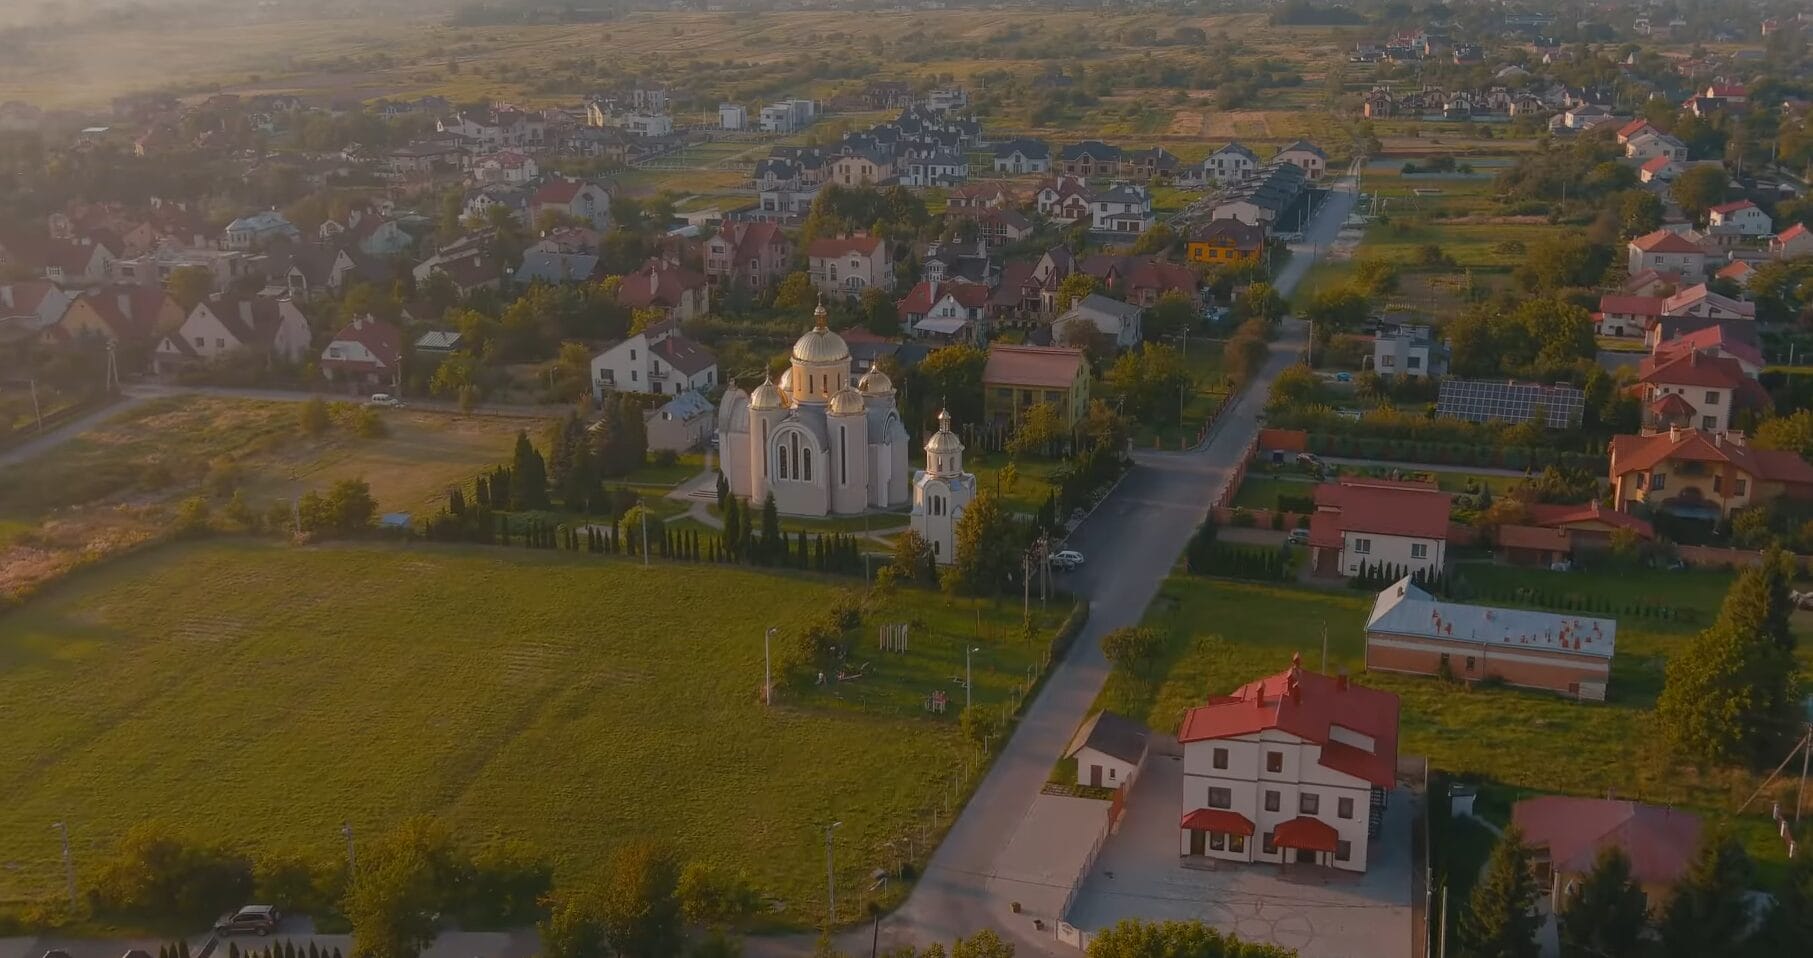 A panorama of the village of Konopnytsia